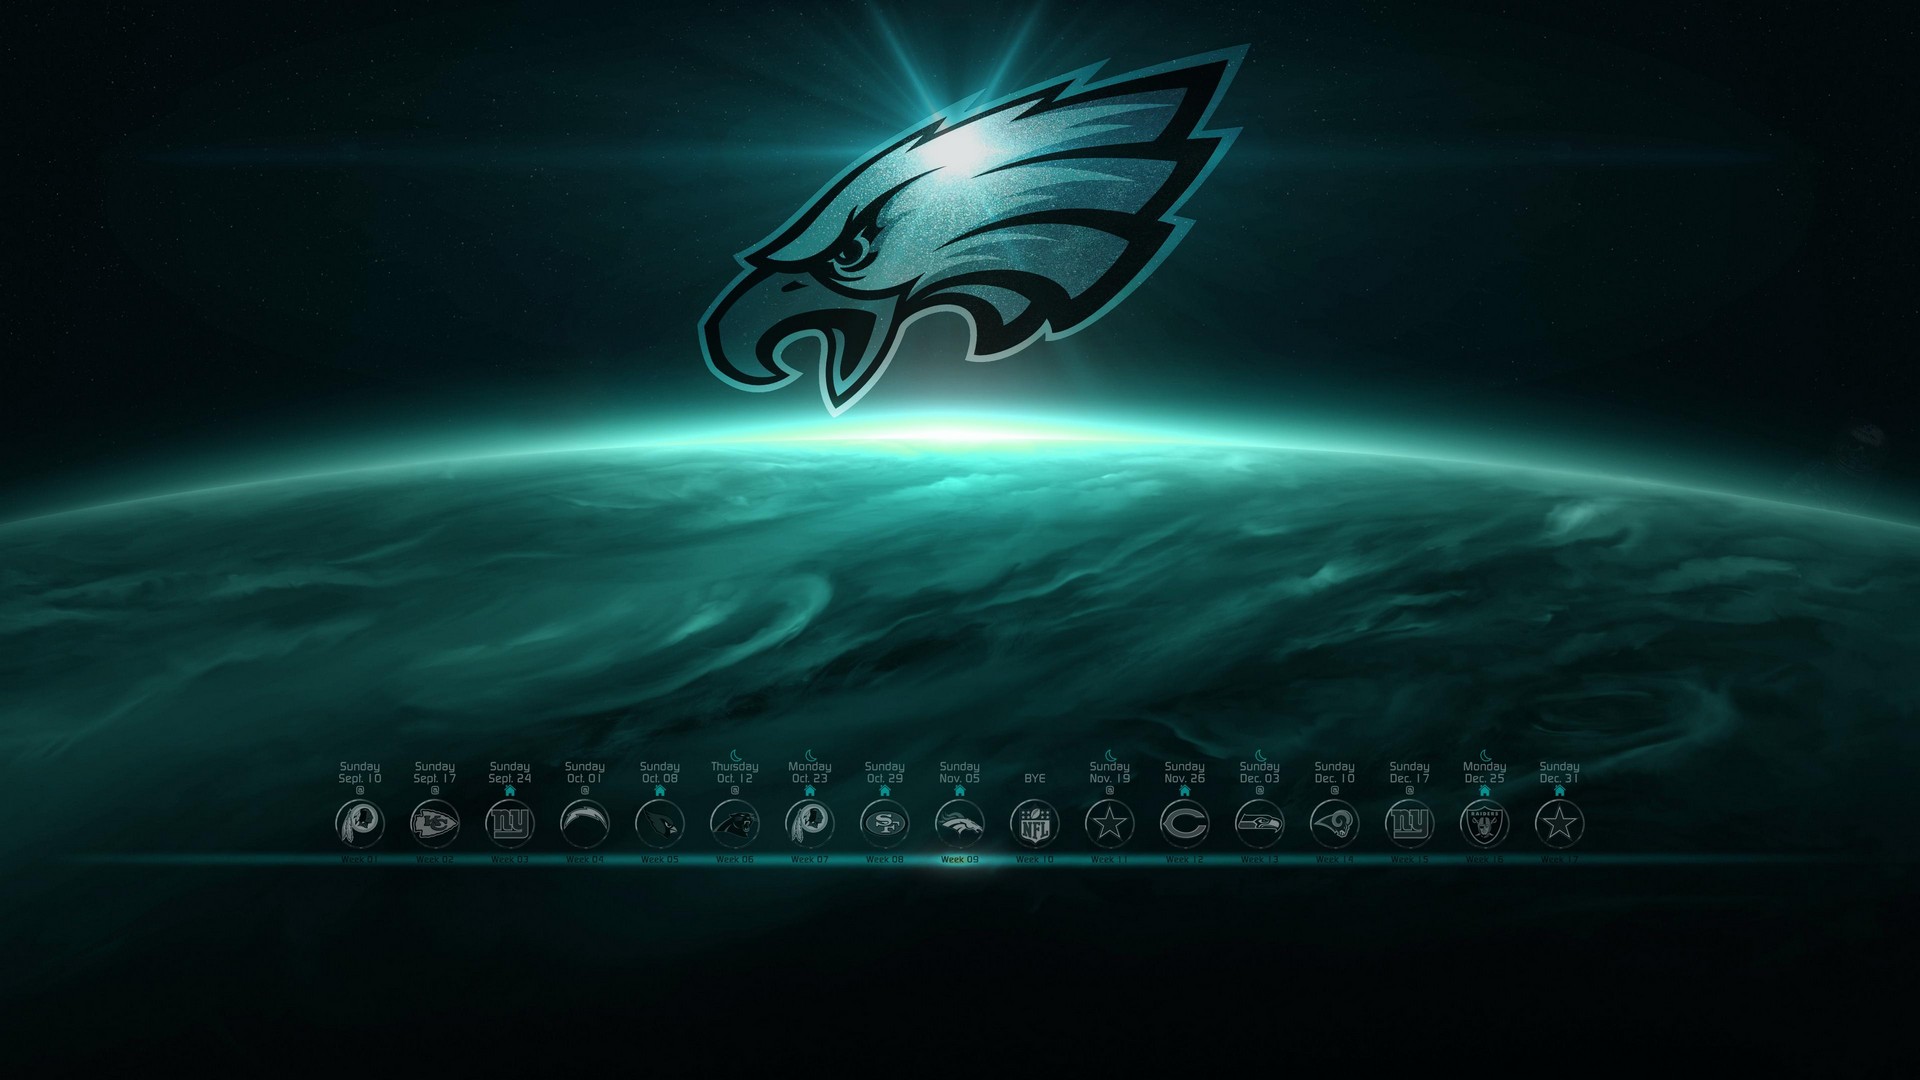 NFL Eagles Wallpaper For Mac Backgrounds With Resolution 1920X1080 pixel. You can make this wallpaper for your Mac or Windows Desktop Background, iPhone, Android or Tablet and another Smartphone device for free